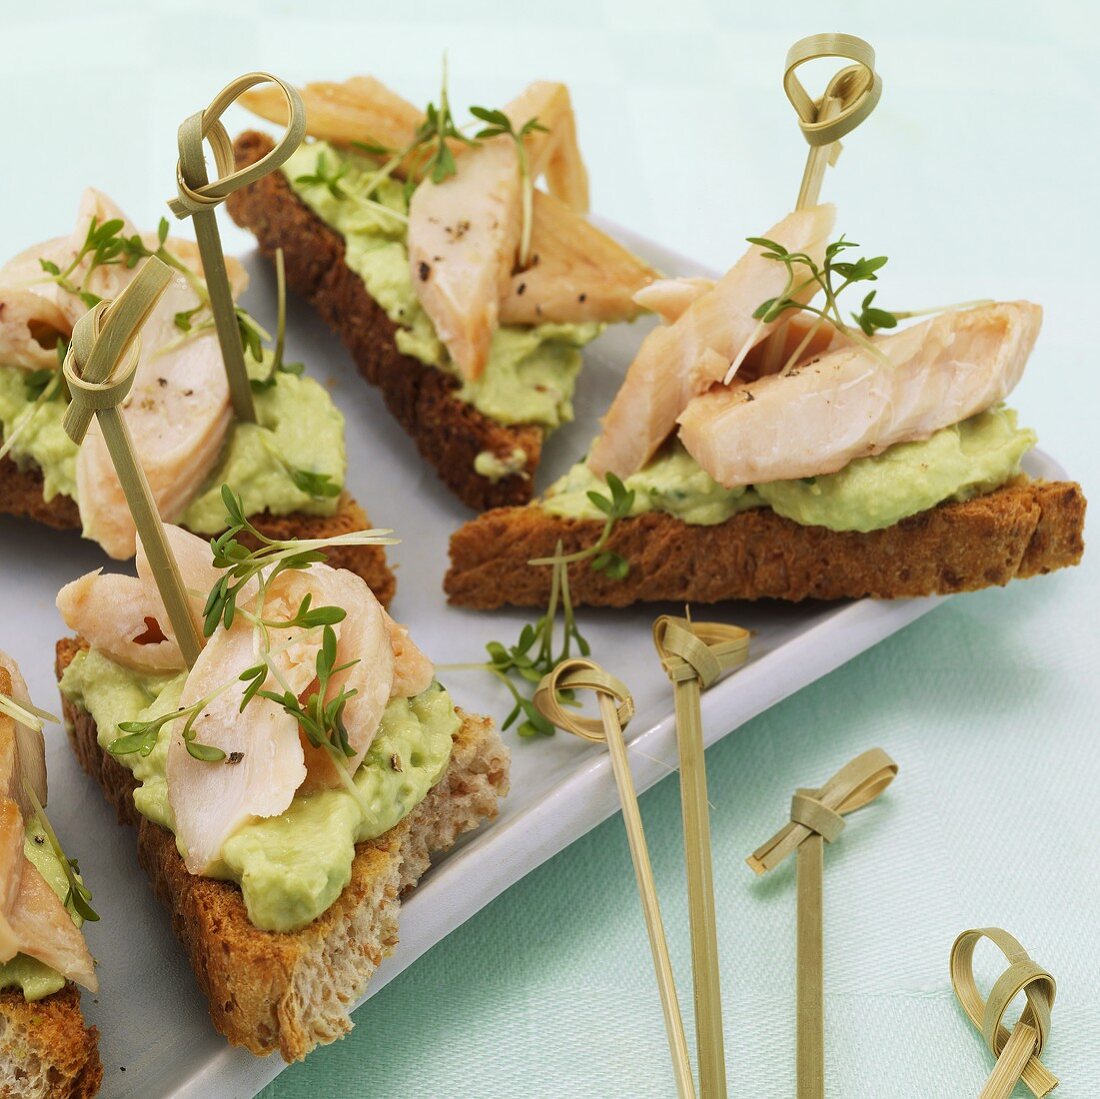 Open sandwiches with avocado cream and smoked fish